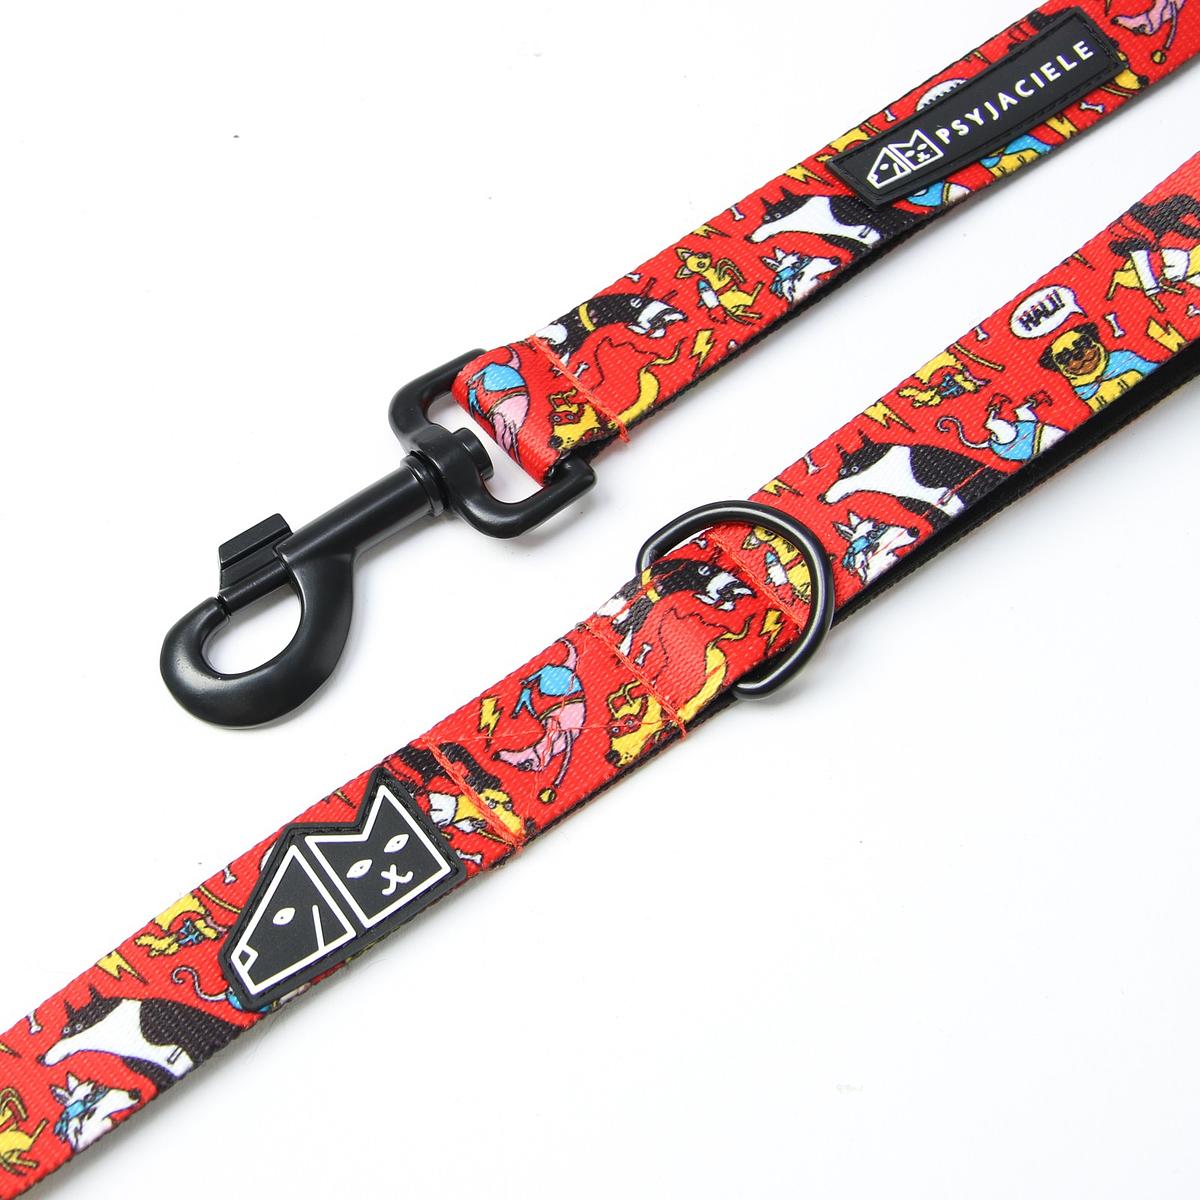 City leash "Woof for the better world" 